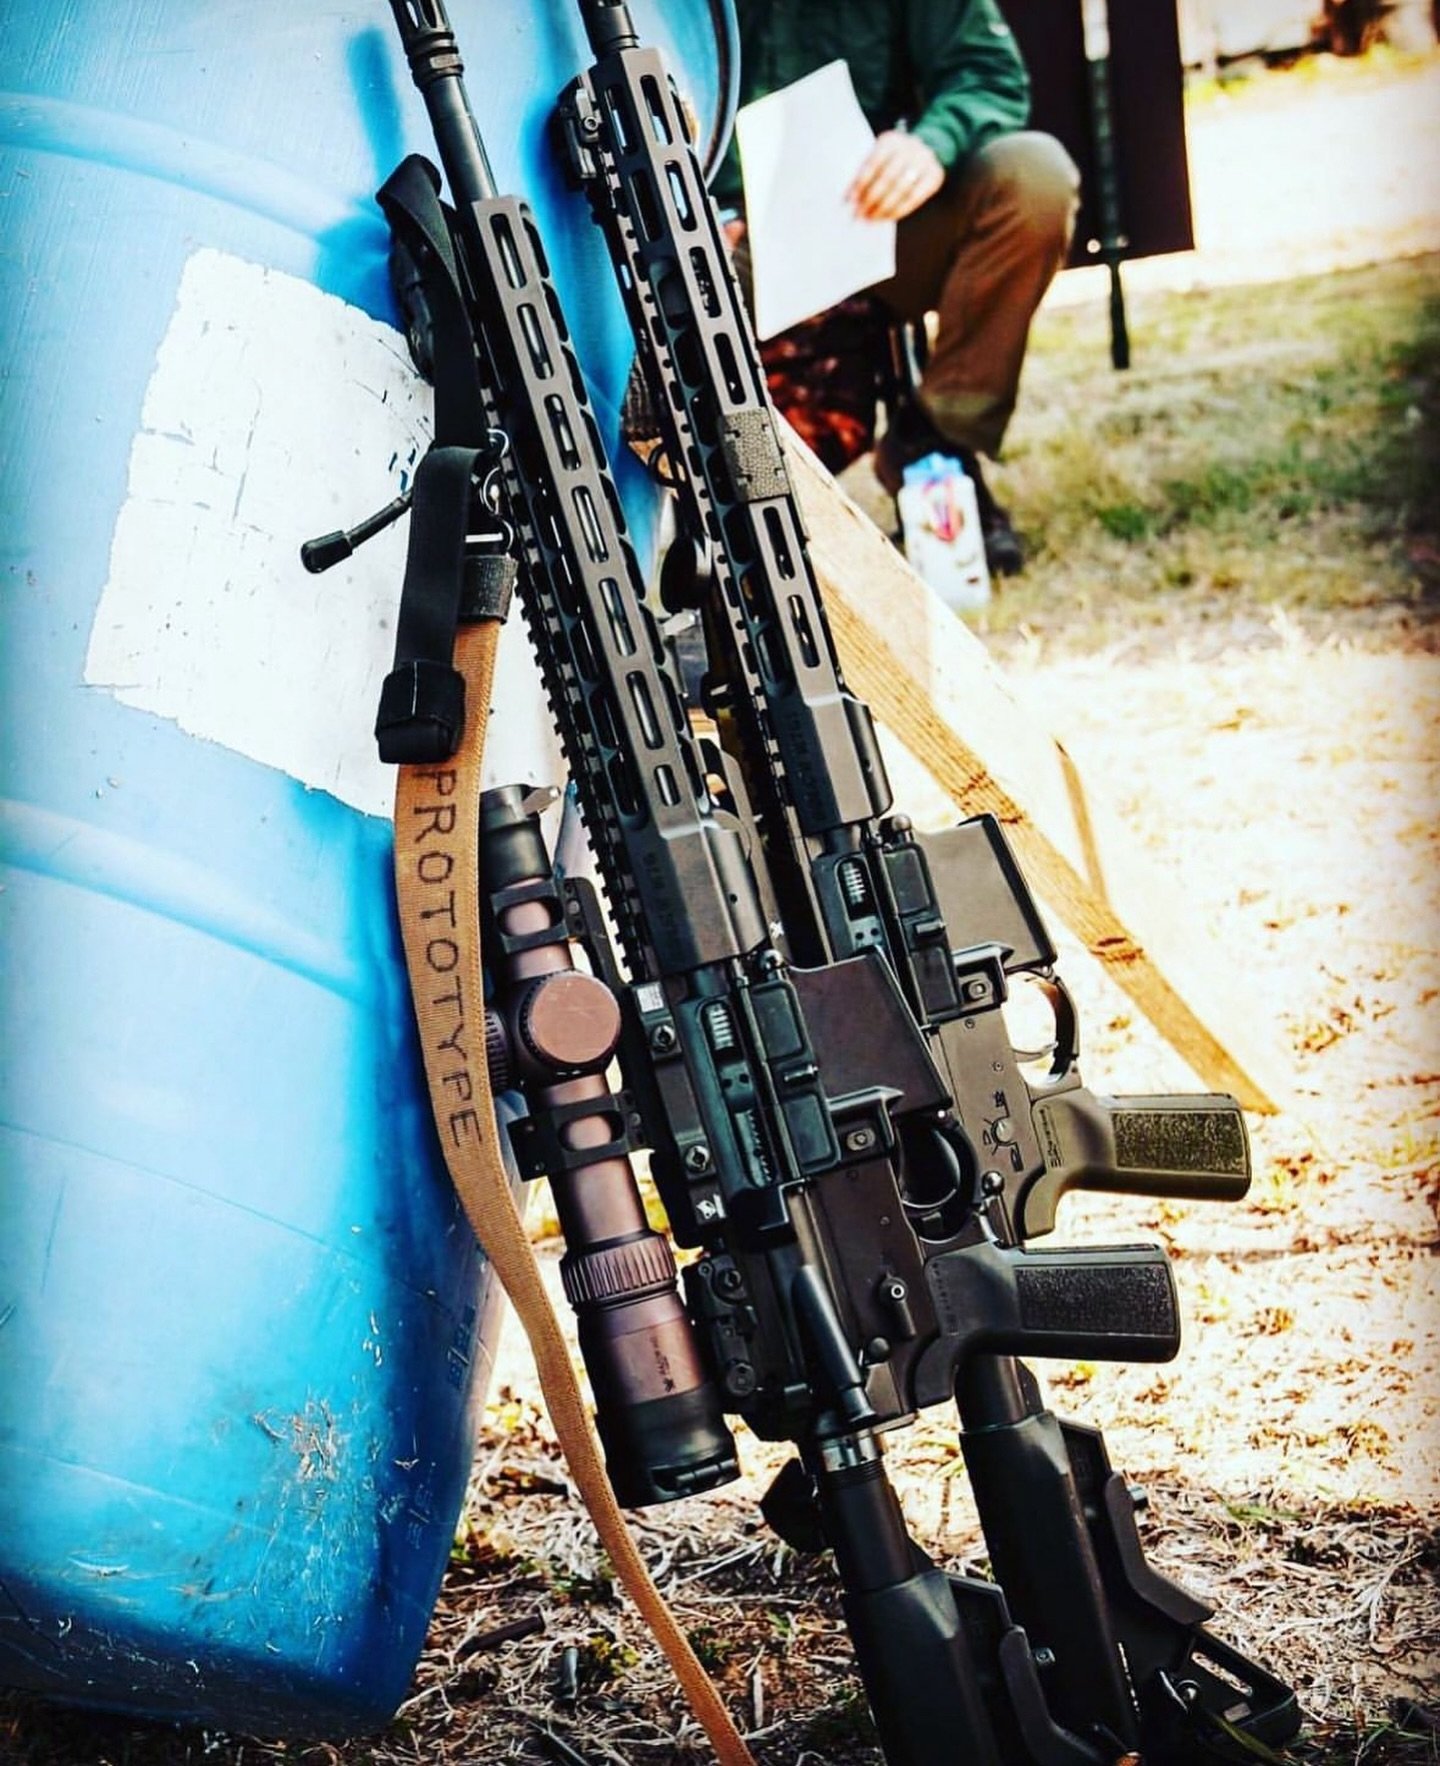 Just a stick and a barrel&hellip; 🛢️
TRAINING SCHEDULE UPDATES ✅⬇️
⚡️TEXAS⚡️
*MAY 11: Defensive Carbine II Class - Pleasanton, TX
*MAY 25 &amp; 26: Low Power Variable Optic - Dilley, TX
*JUN 01: Defensive Shotgun Class - Dilley, TX
*JUN 22: Defensiv